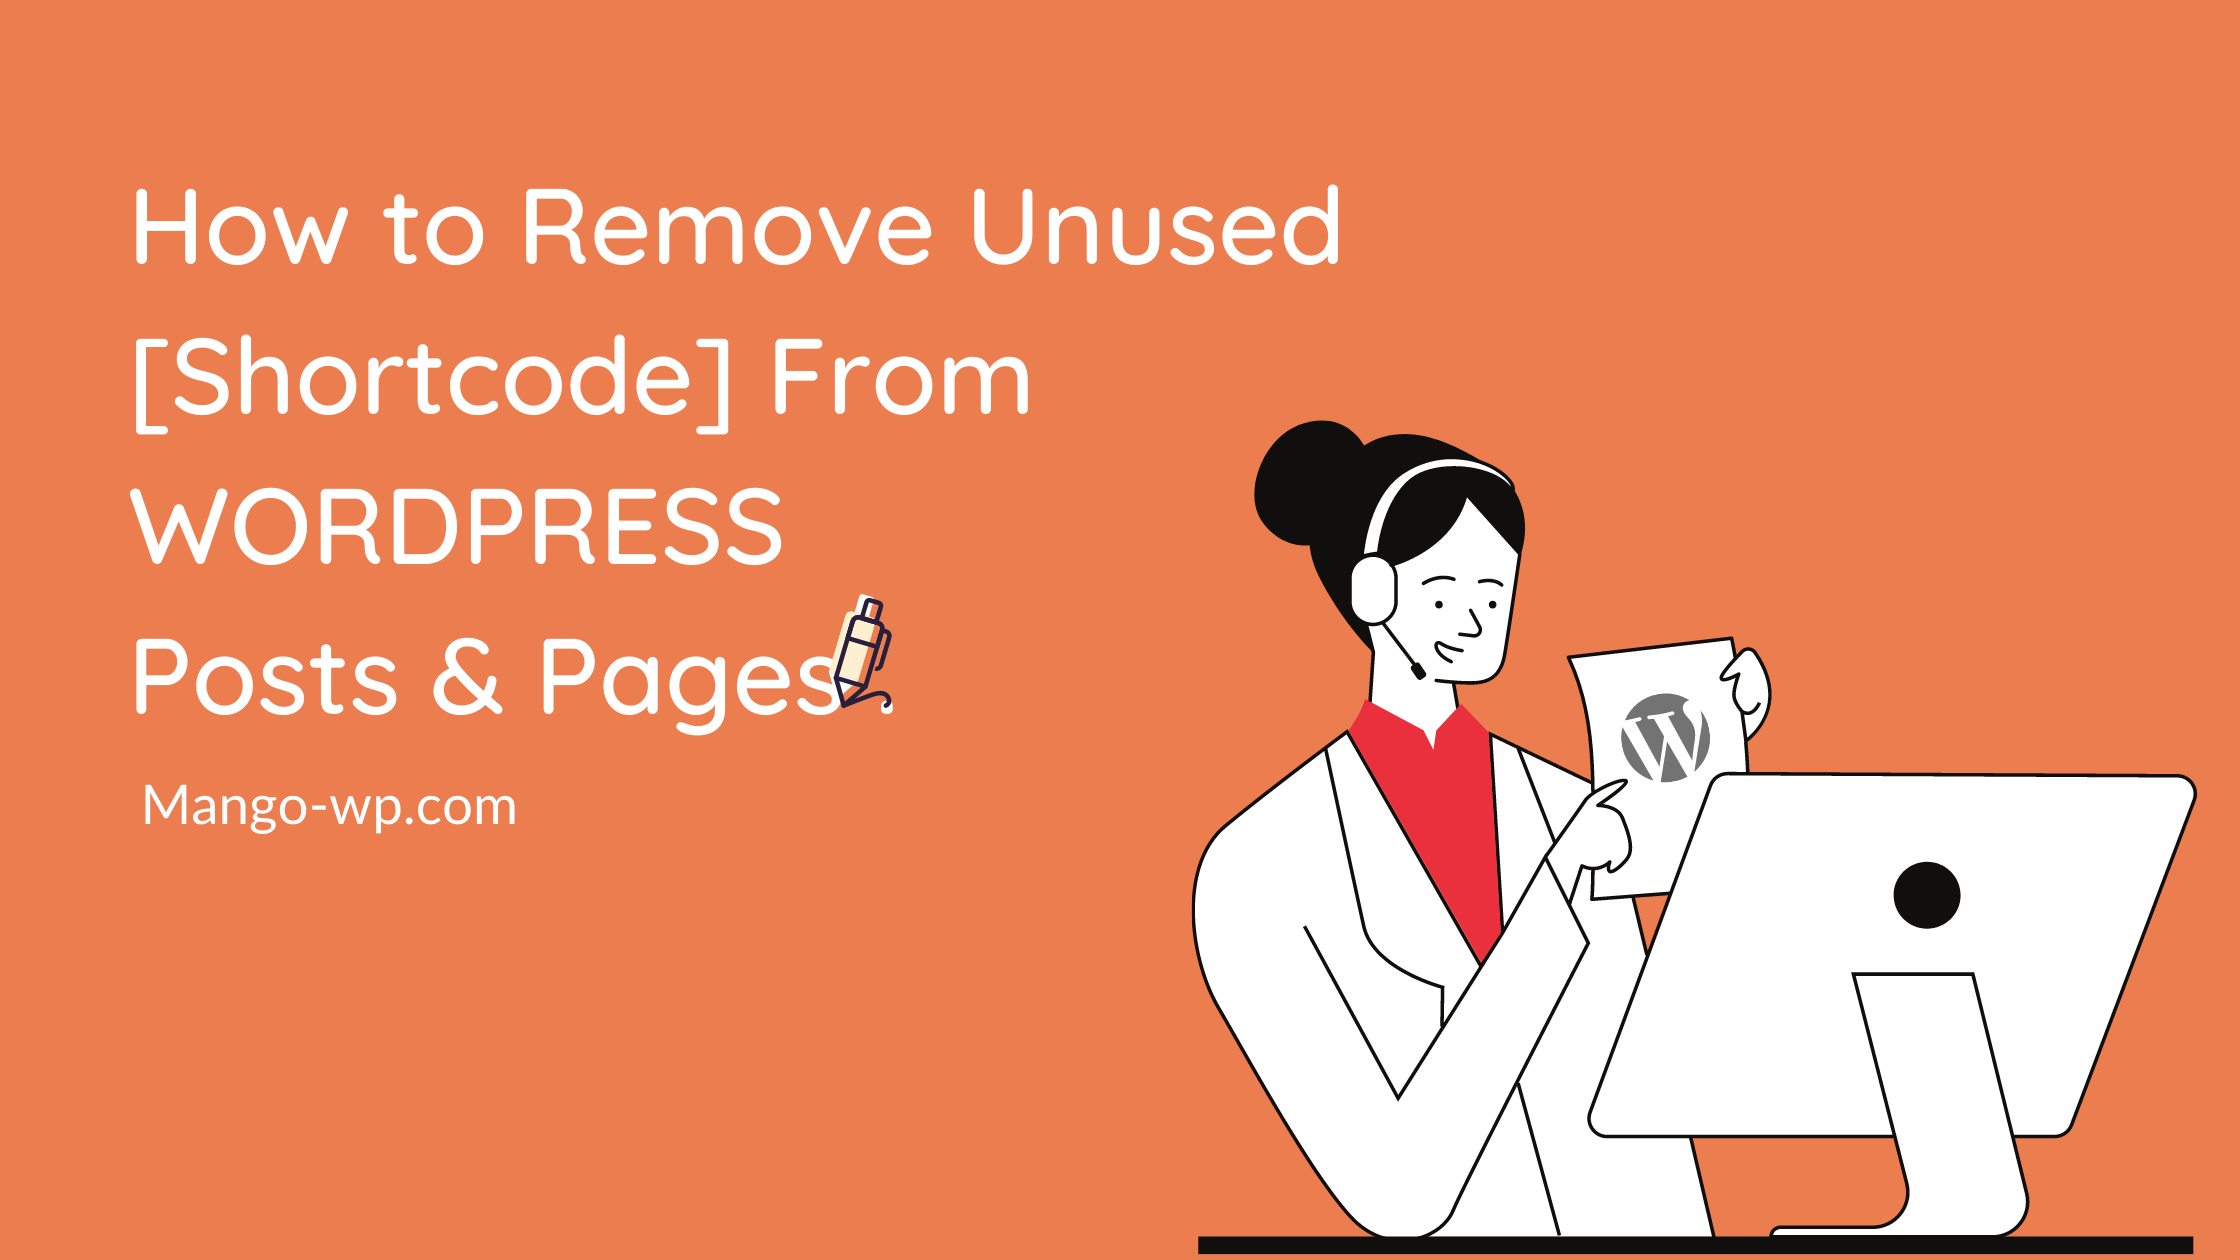 3 ways to find and remove unused shortcodes from Wordpress posts or pages